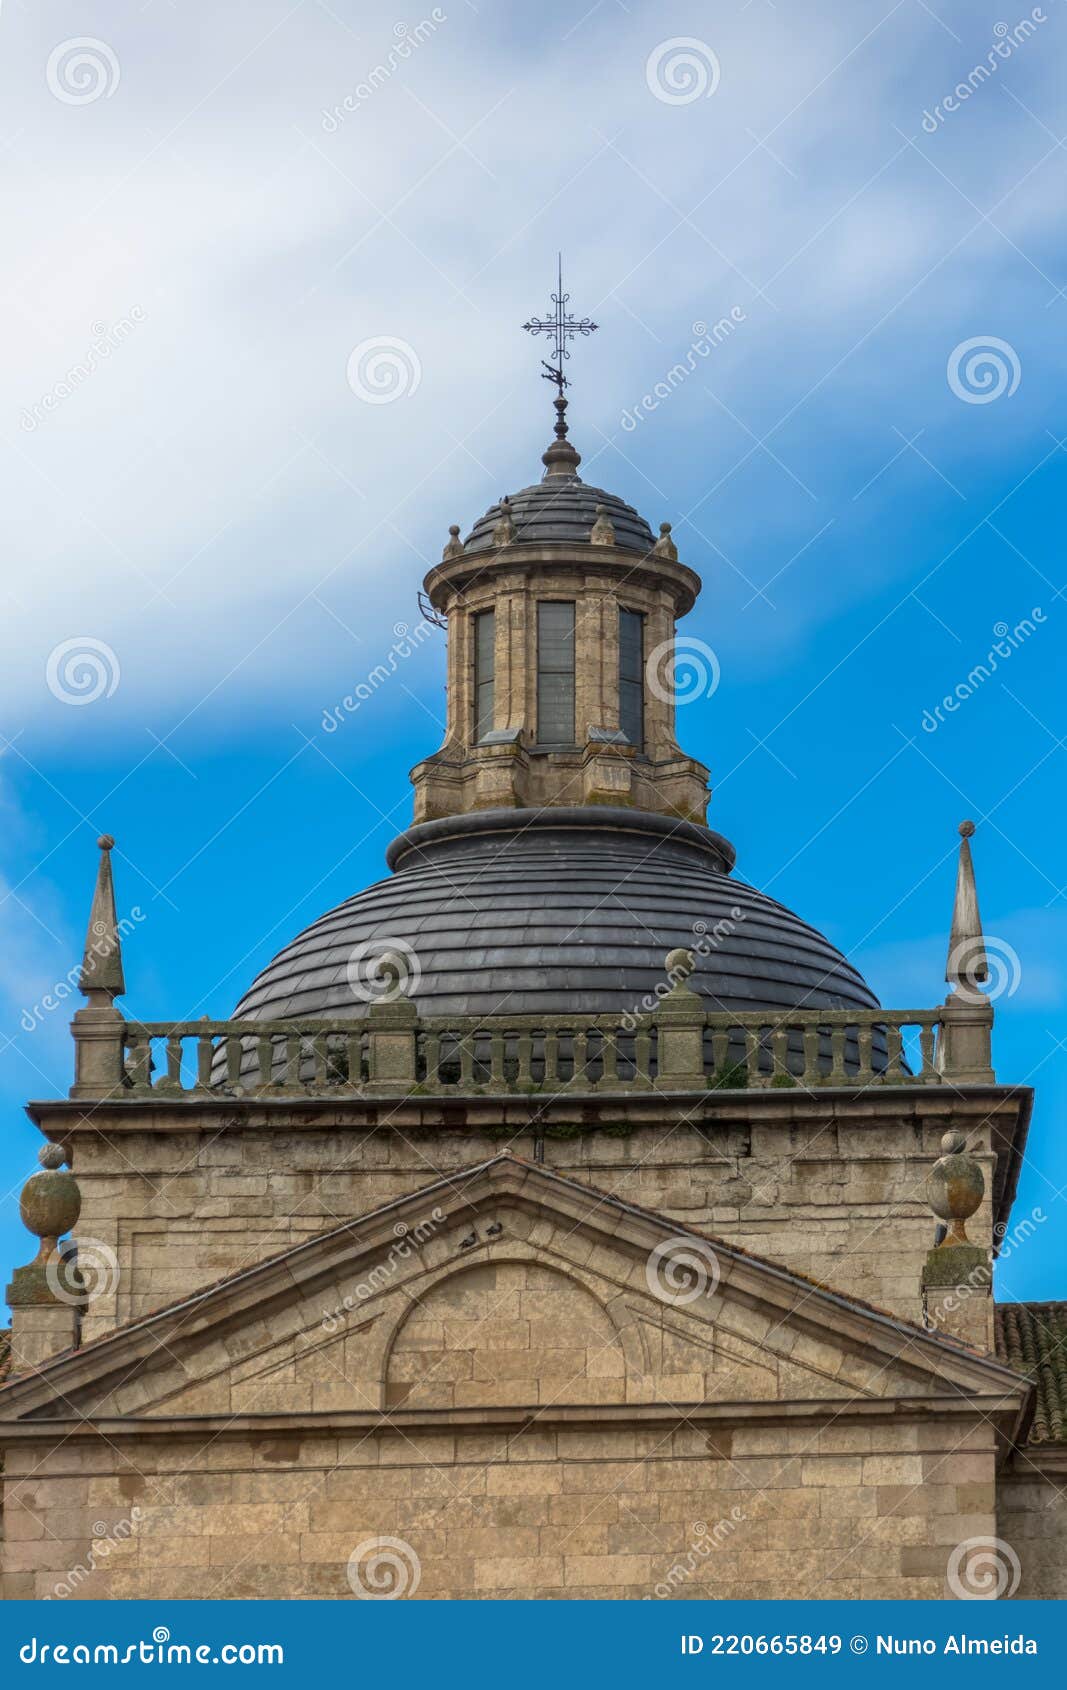 back view at the dome copula tower at the iconic spanish romanesque and renaissance architecture building at the iglesia de